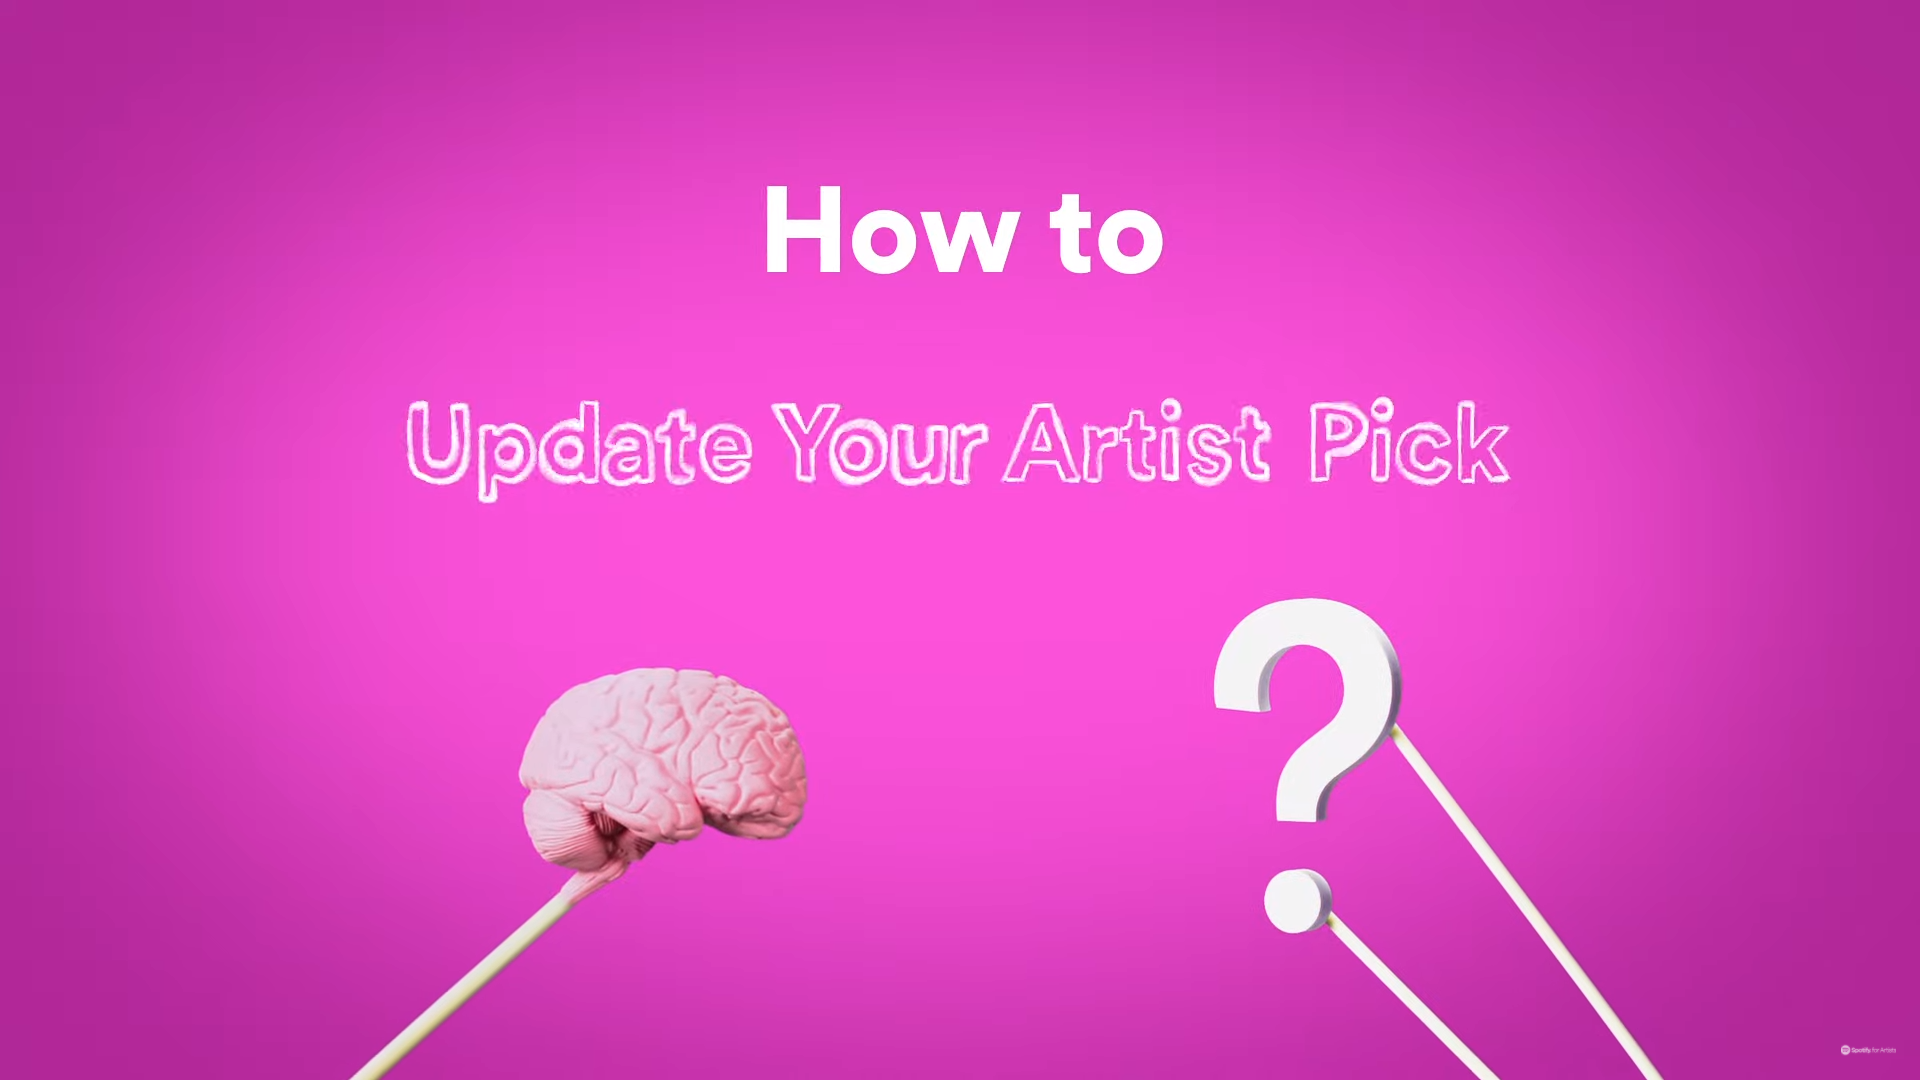 How to change your Artist Pick on your Spotify profile